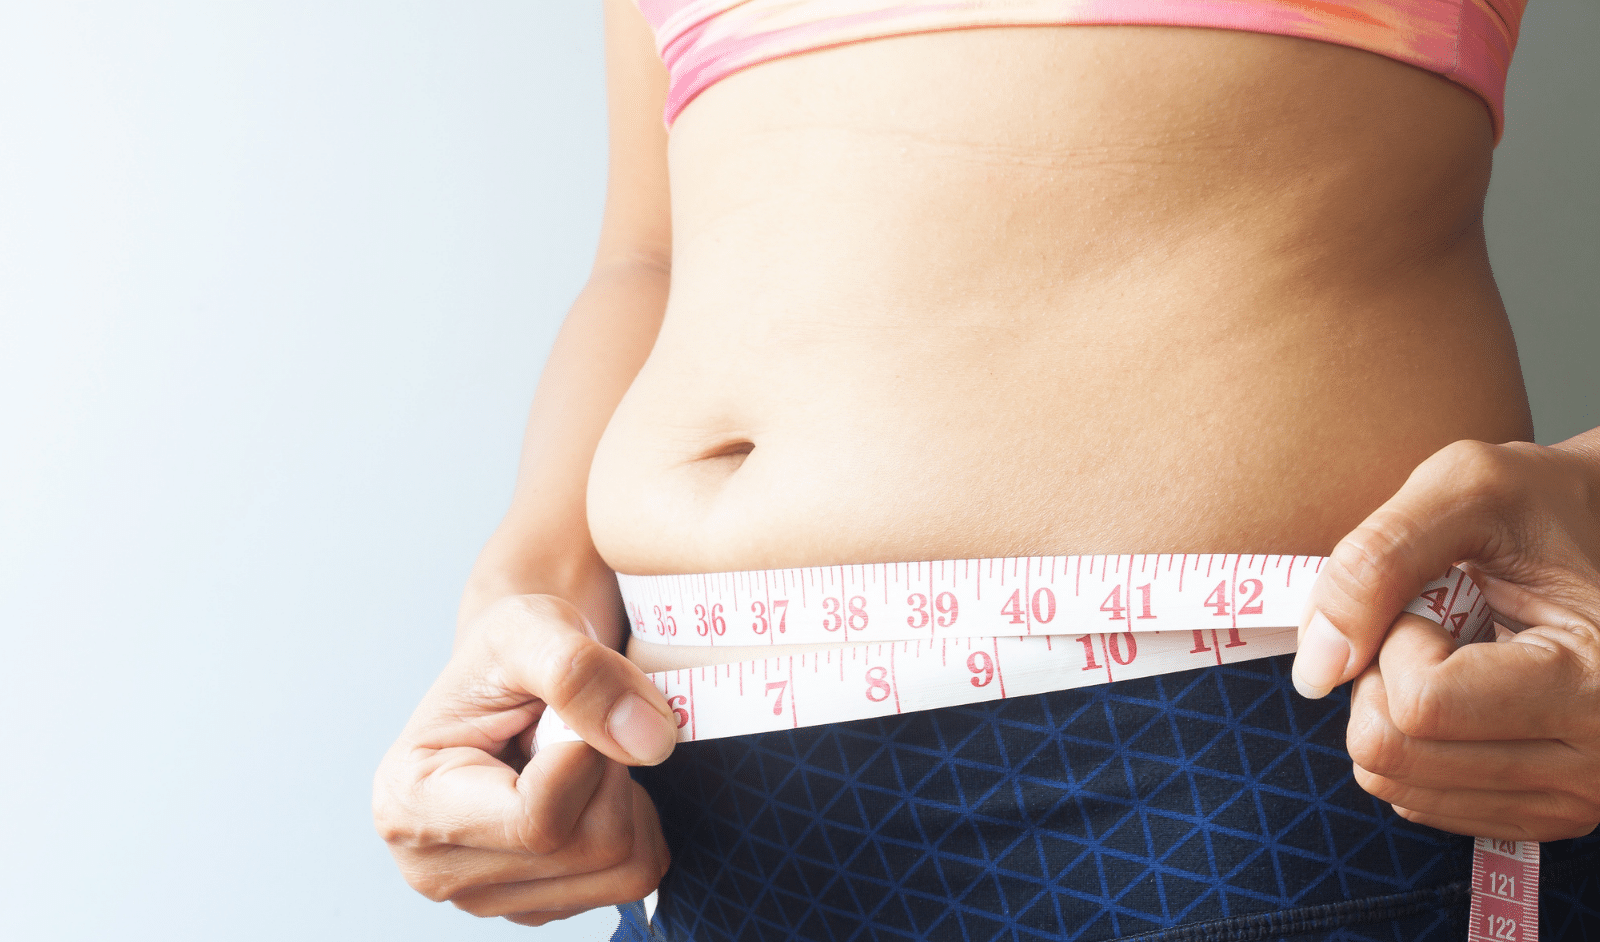 The 3 Most Effective Ways to Lose Belly Fat, Based on Science  